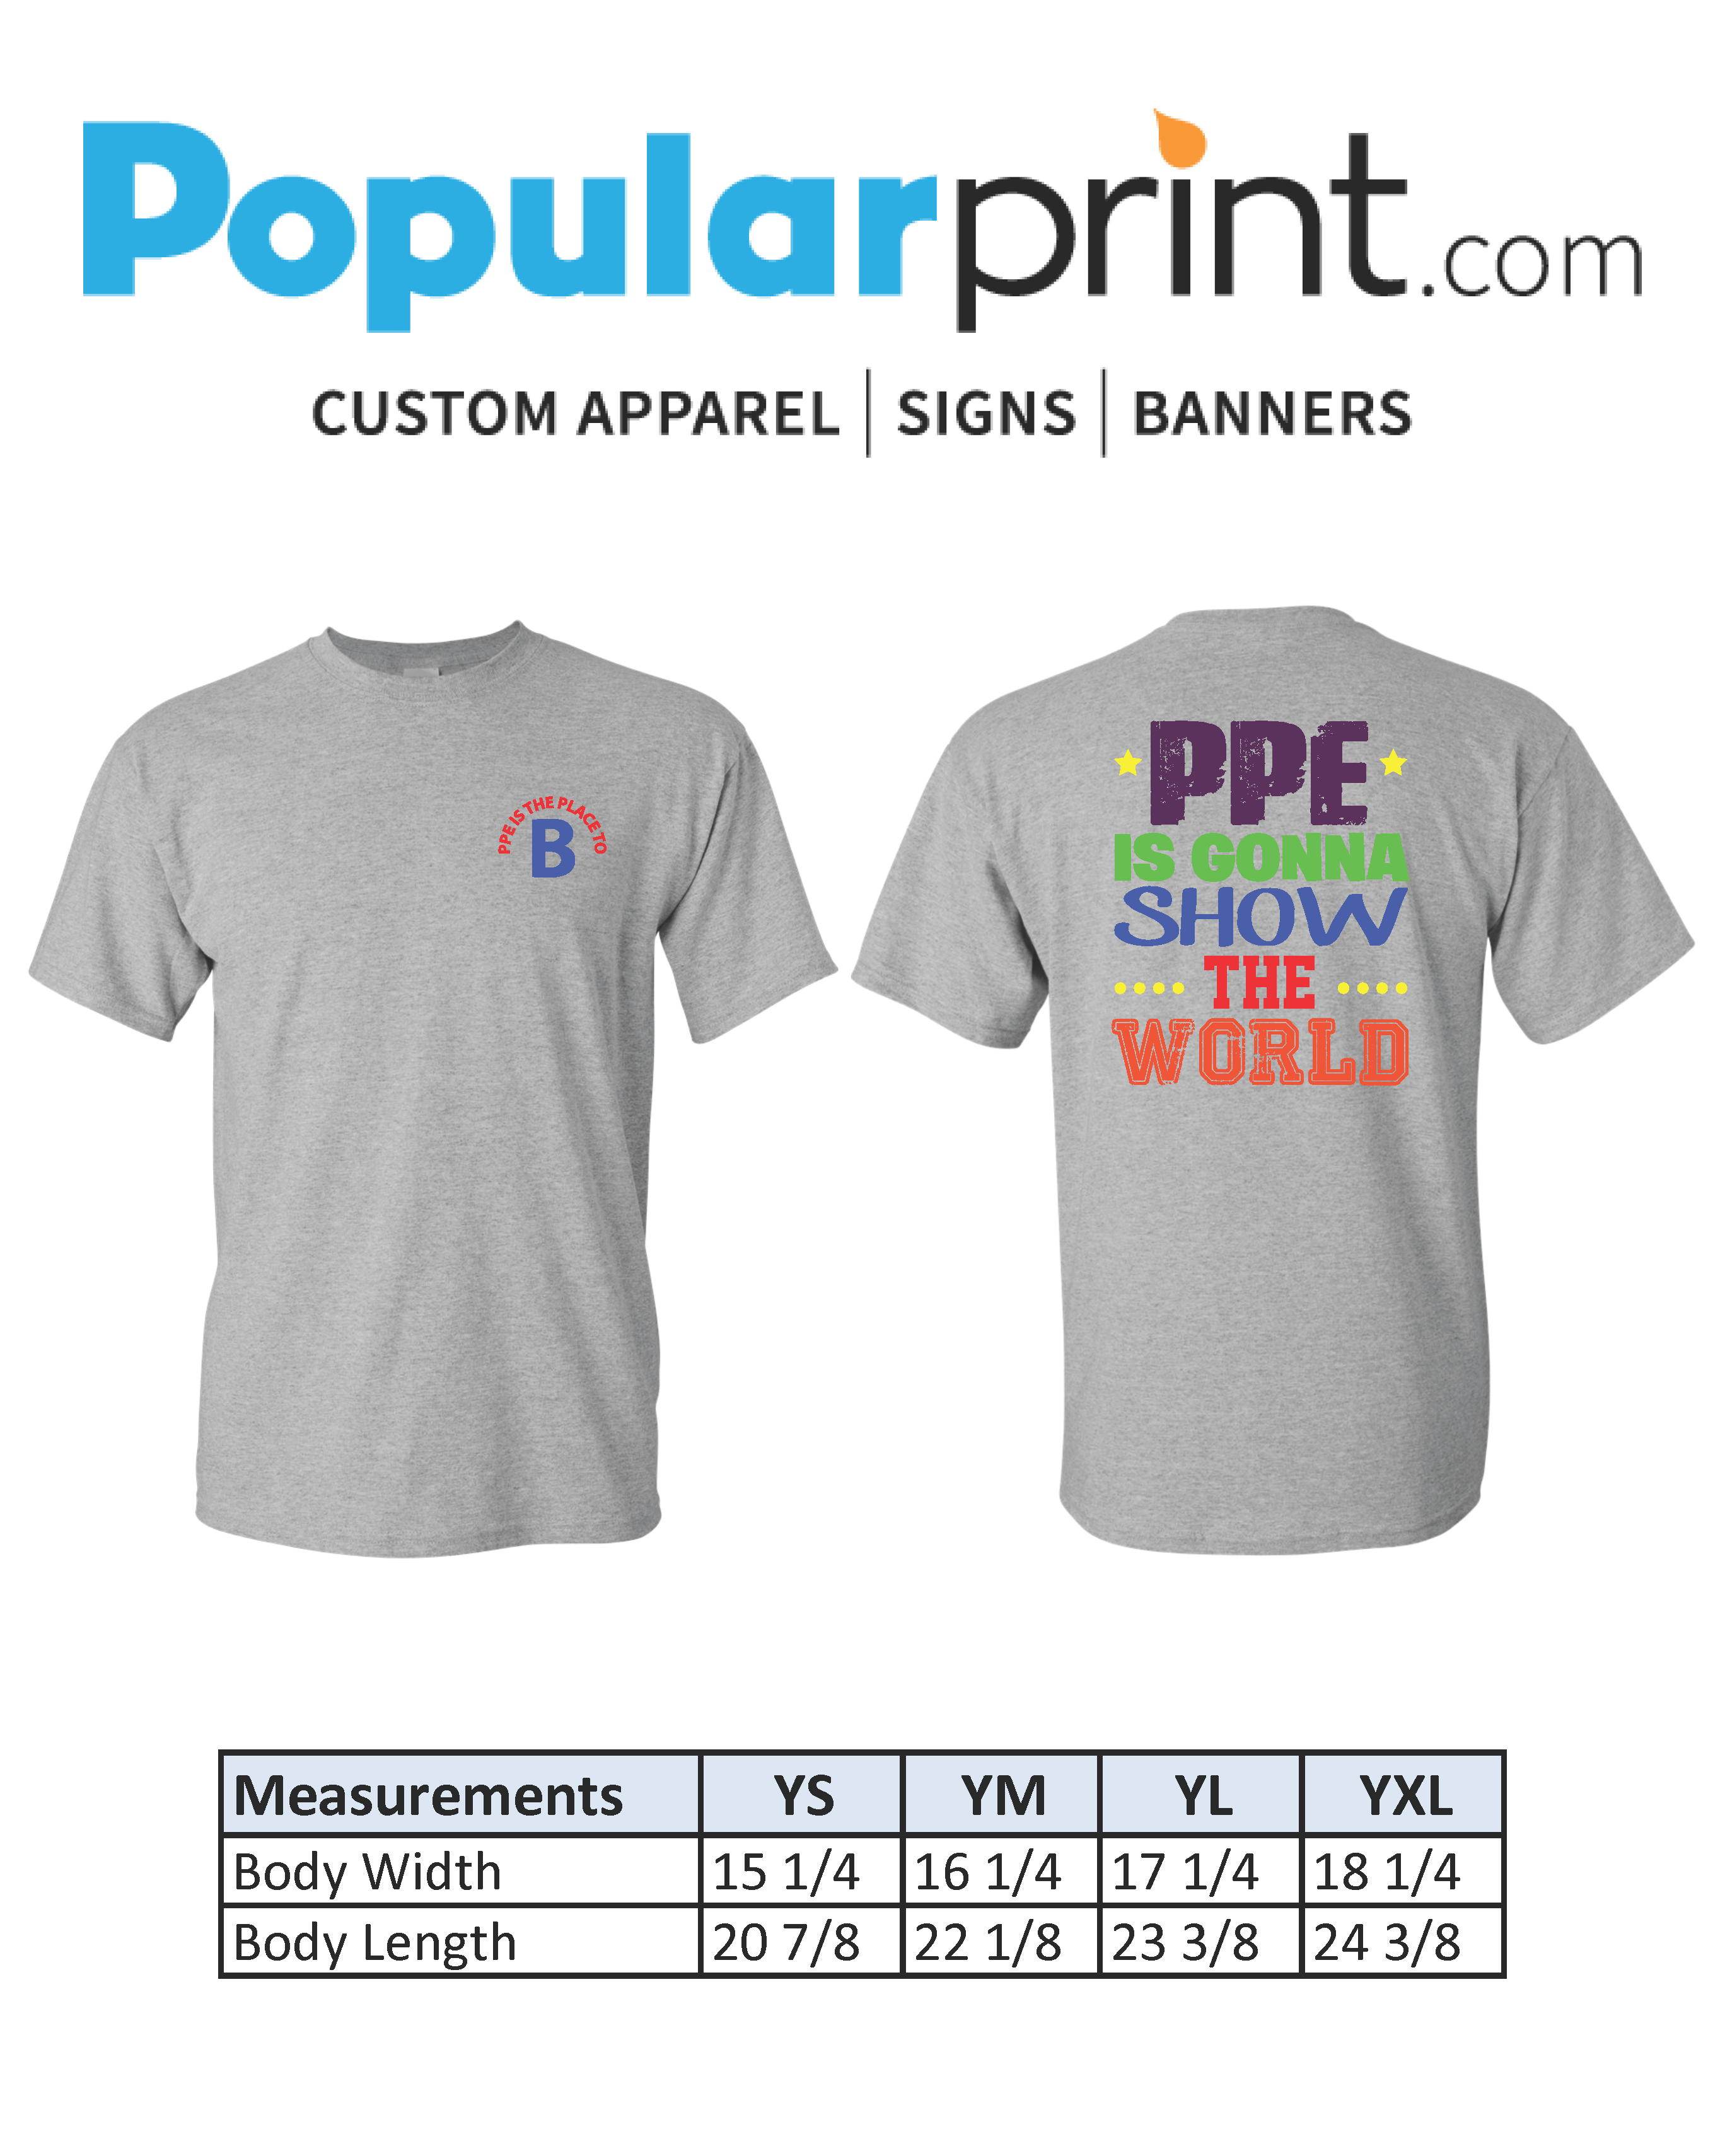 Plantation Elementary Is Going To Show The World Short-Sleeve T-Shirt